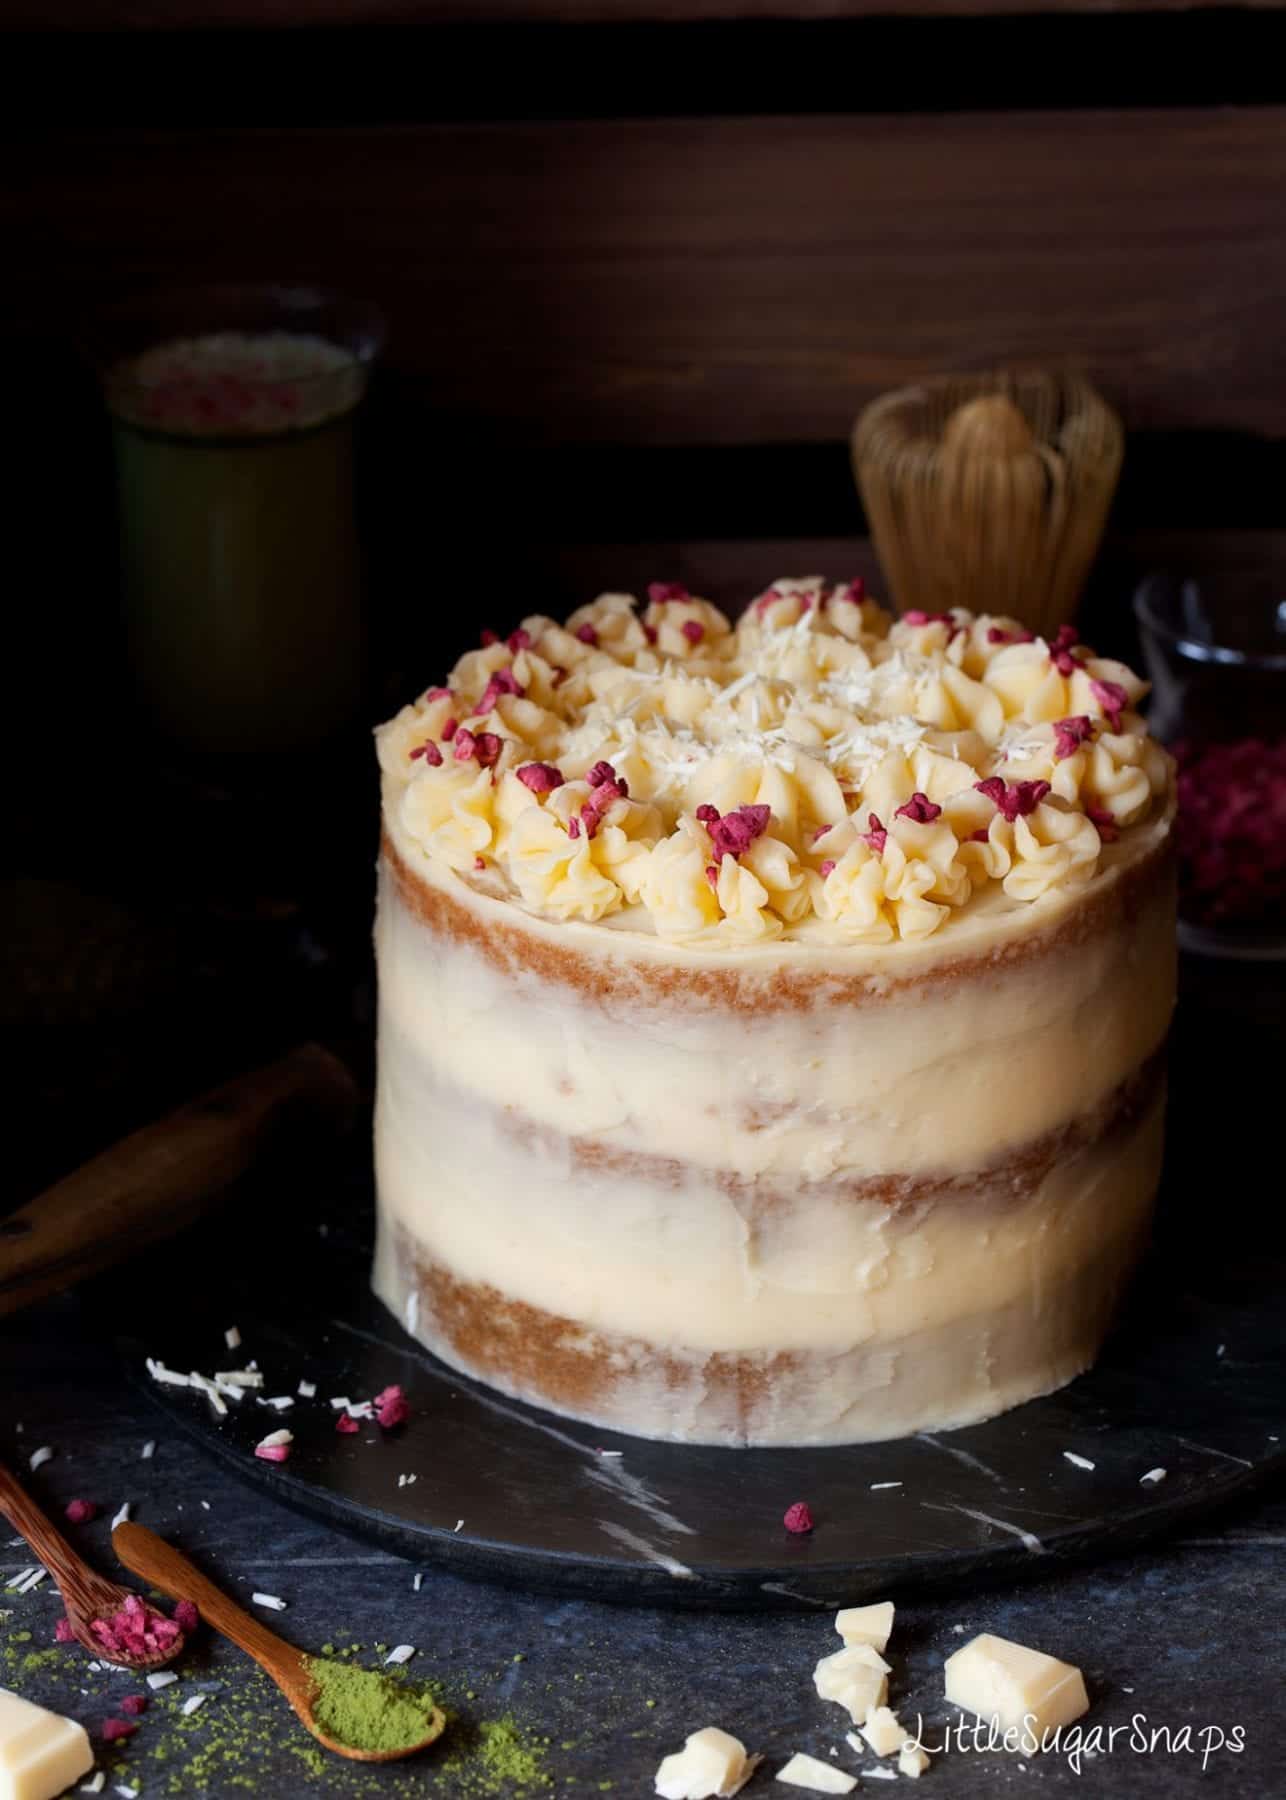 A naked style layer cake topped with freeze dried raspberries and grated white chocolate.